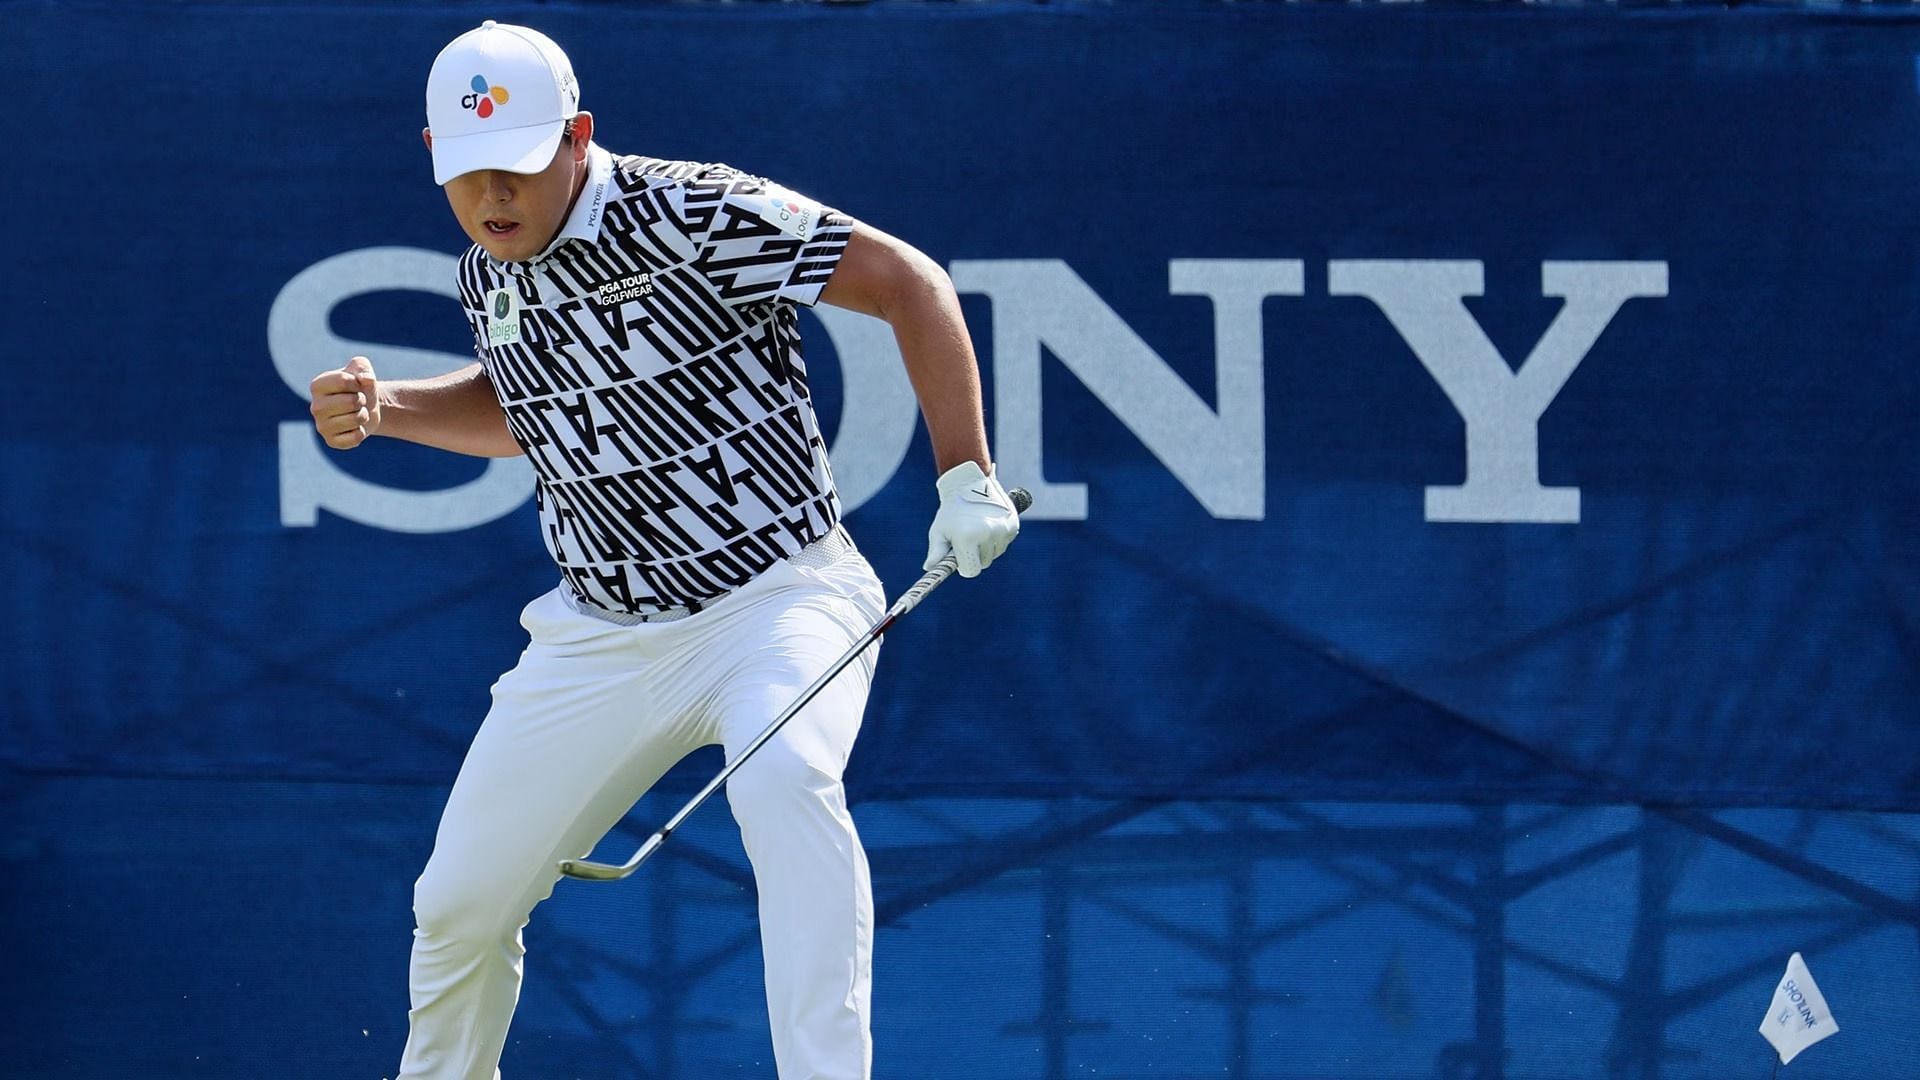 Si Woo Kim fist pumping after securing win in Sony Open